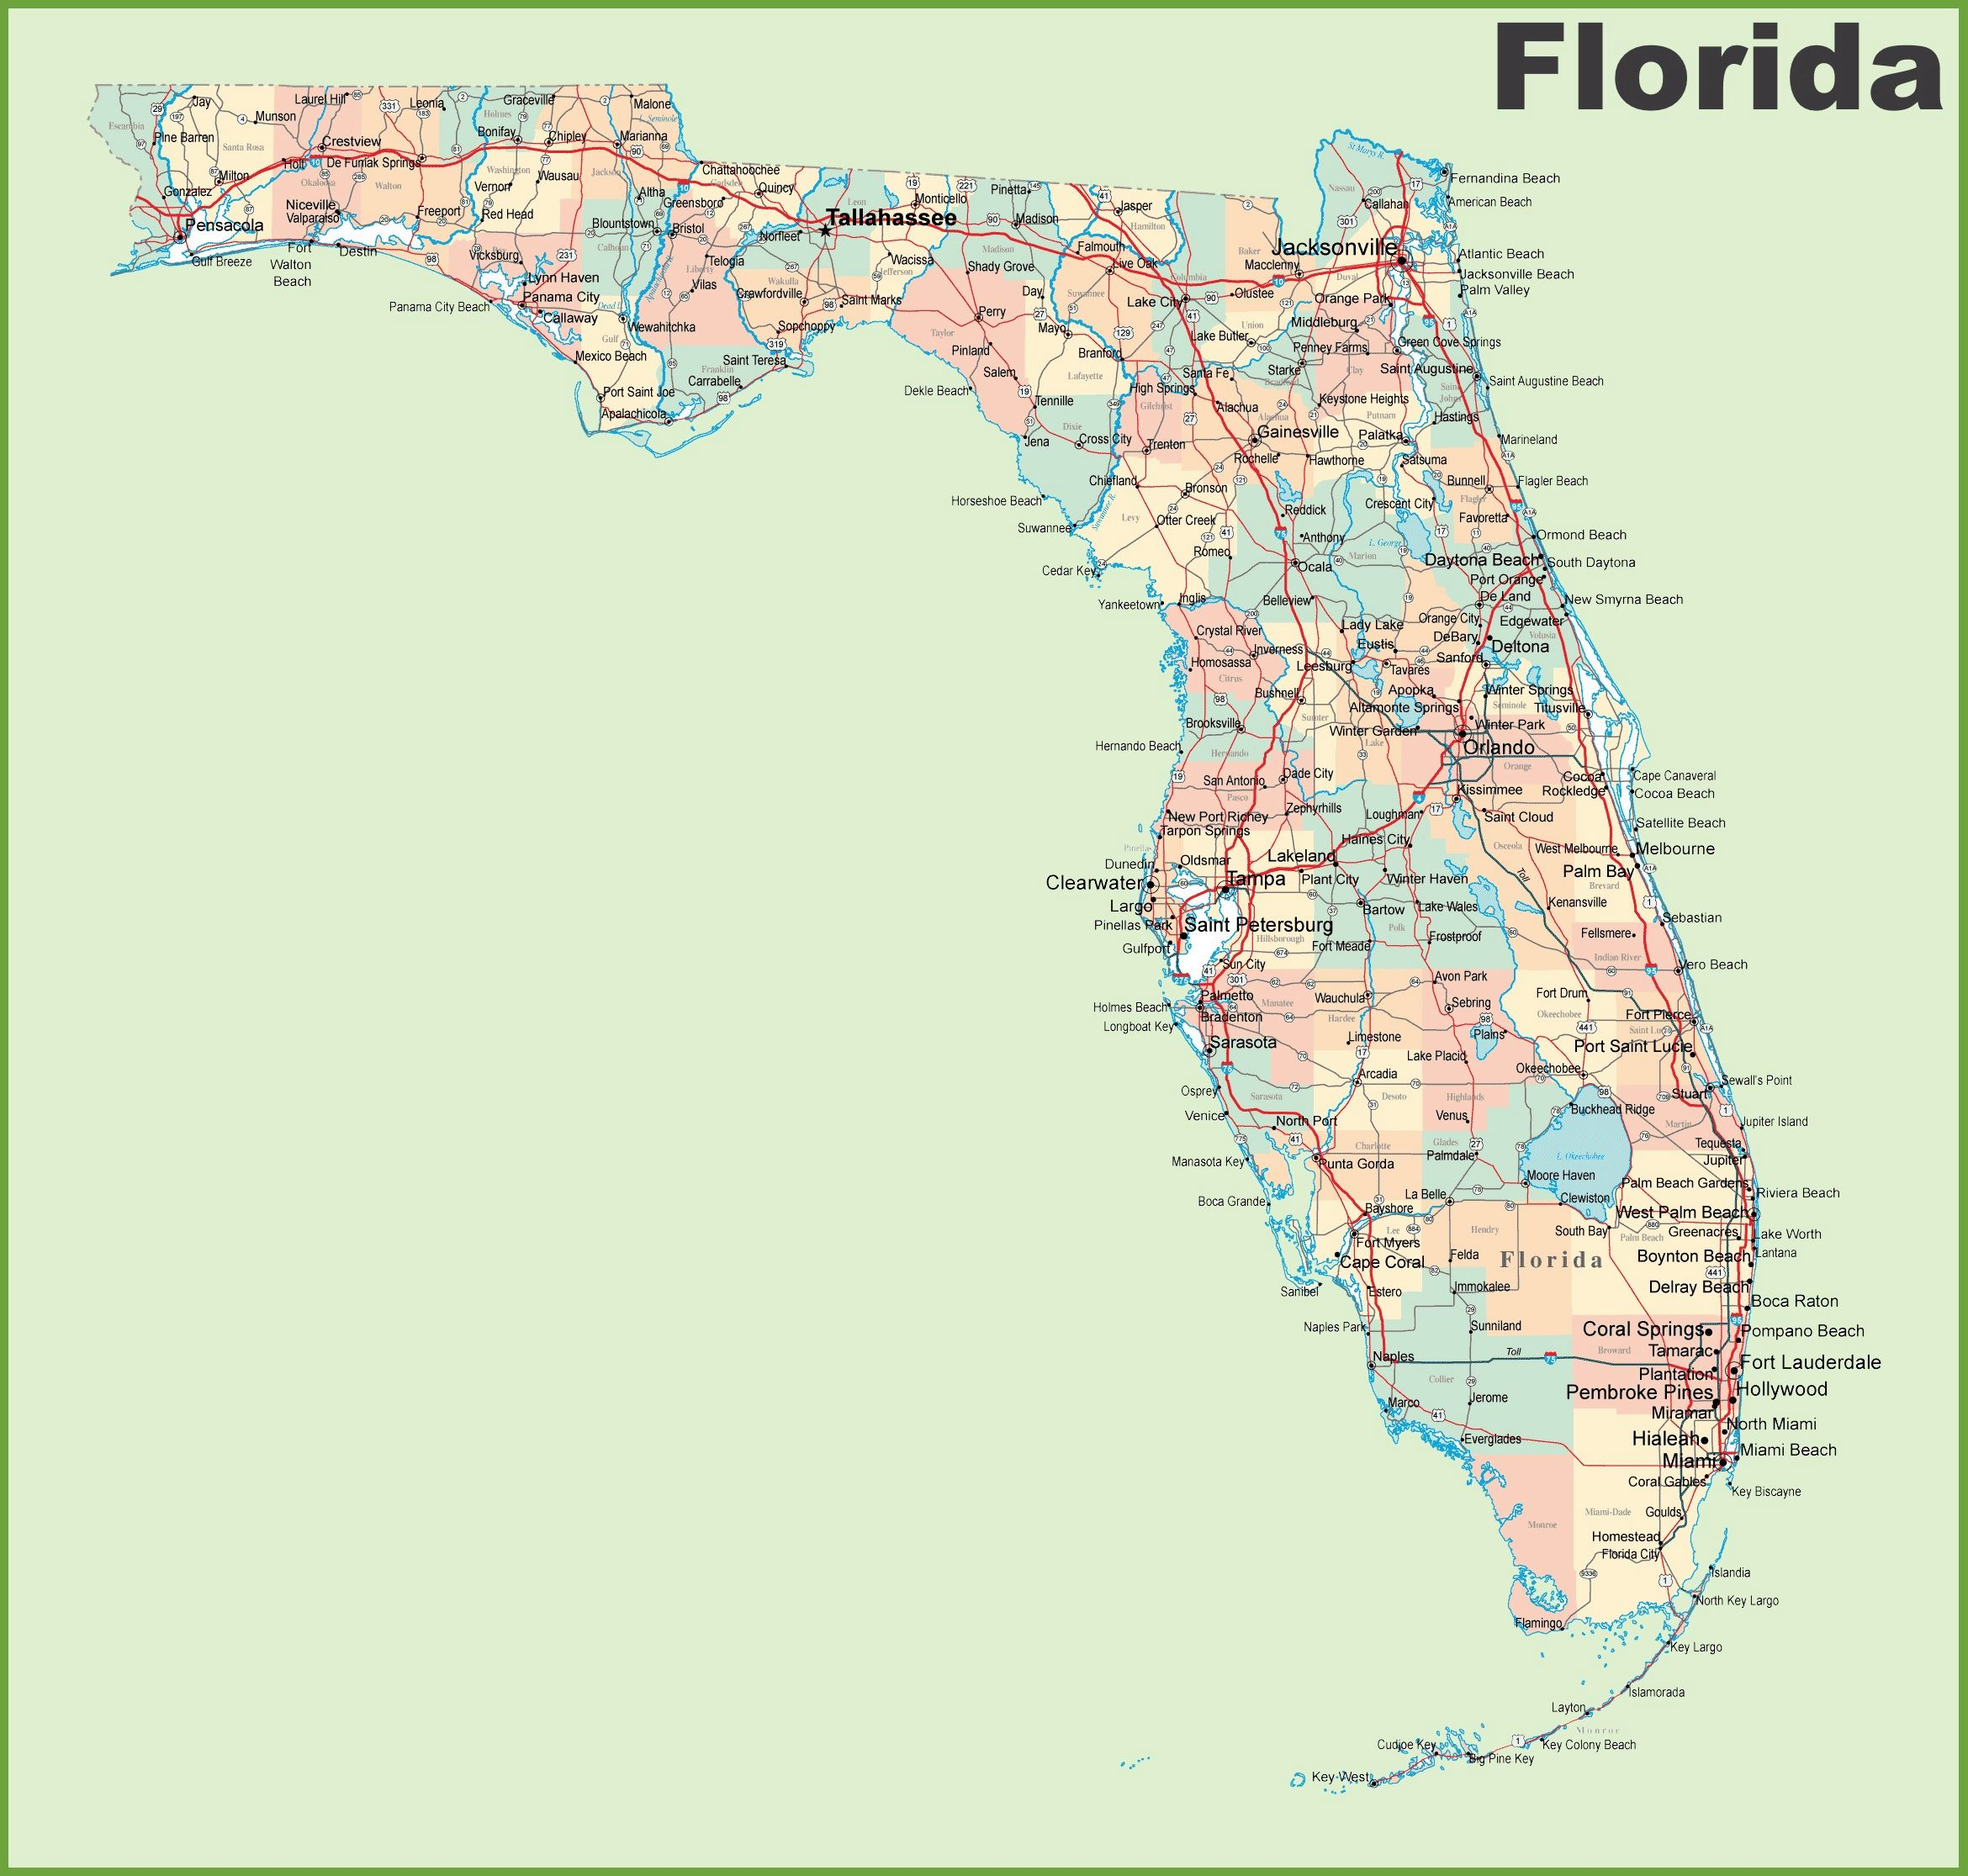 Large Florida Maps For Free Download And Print | High-Resolution And - Large Detailed Map Of Florida